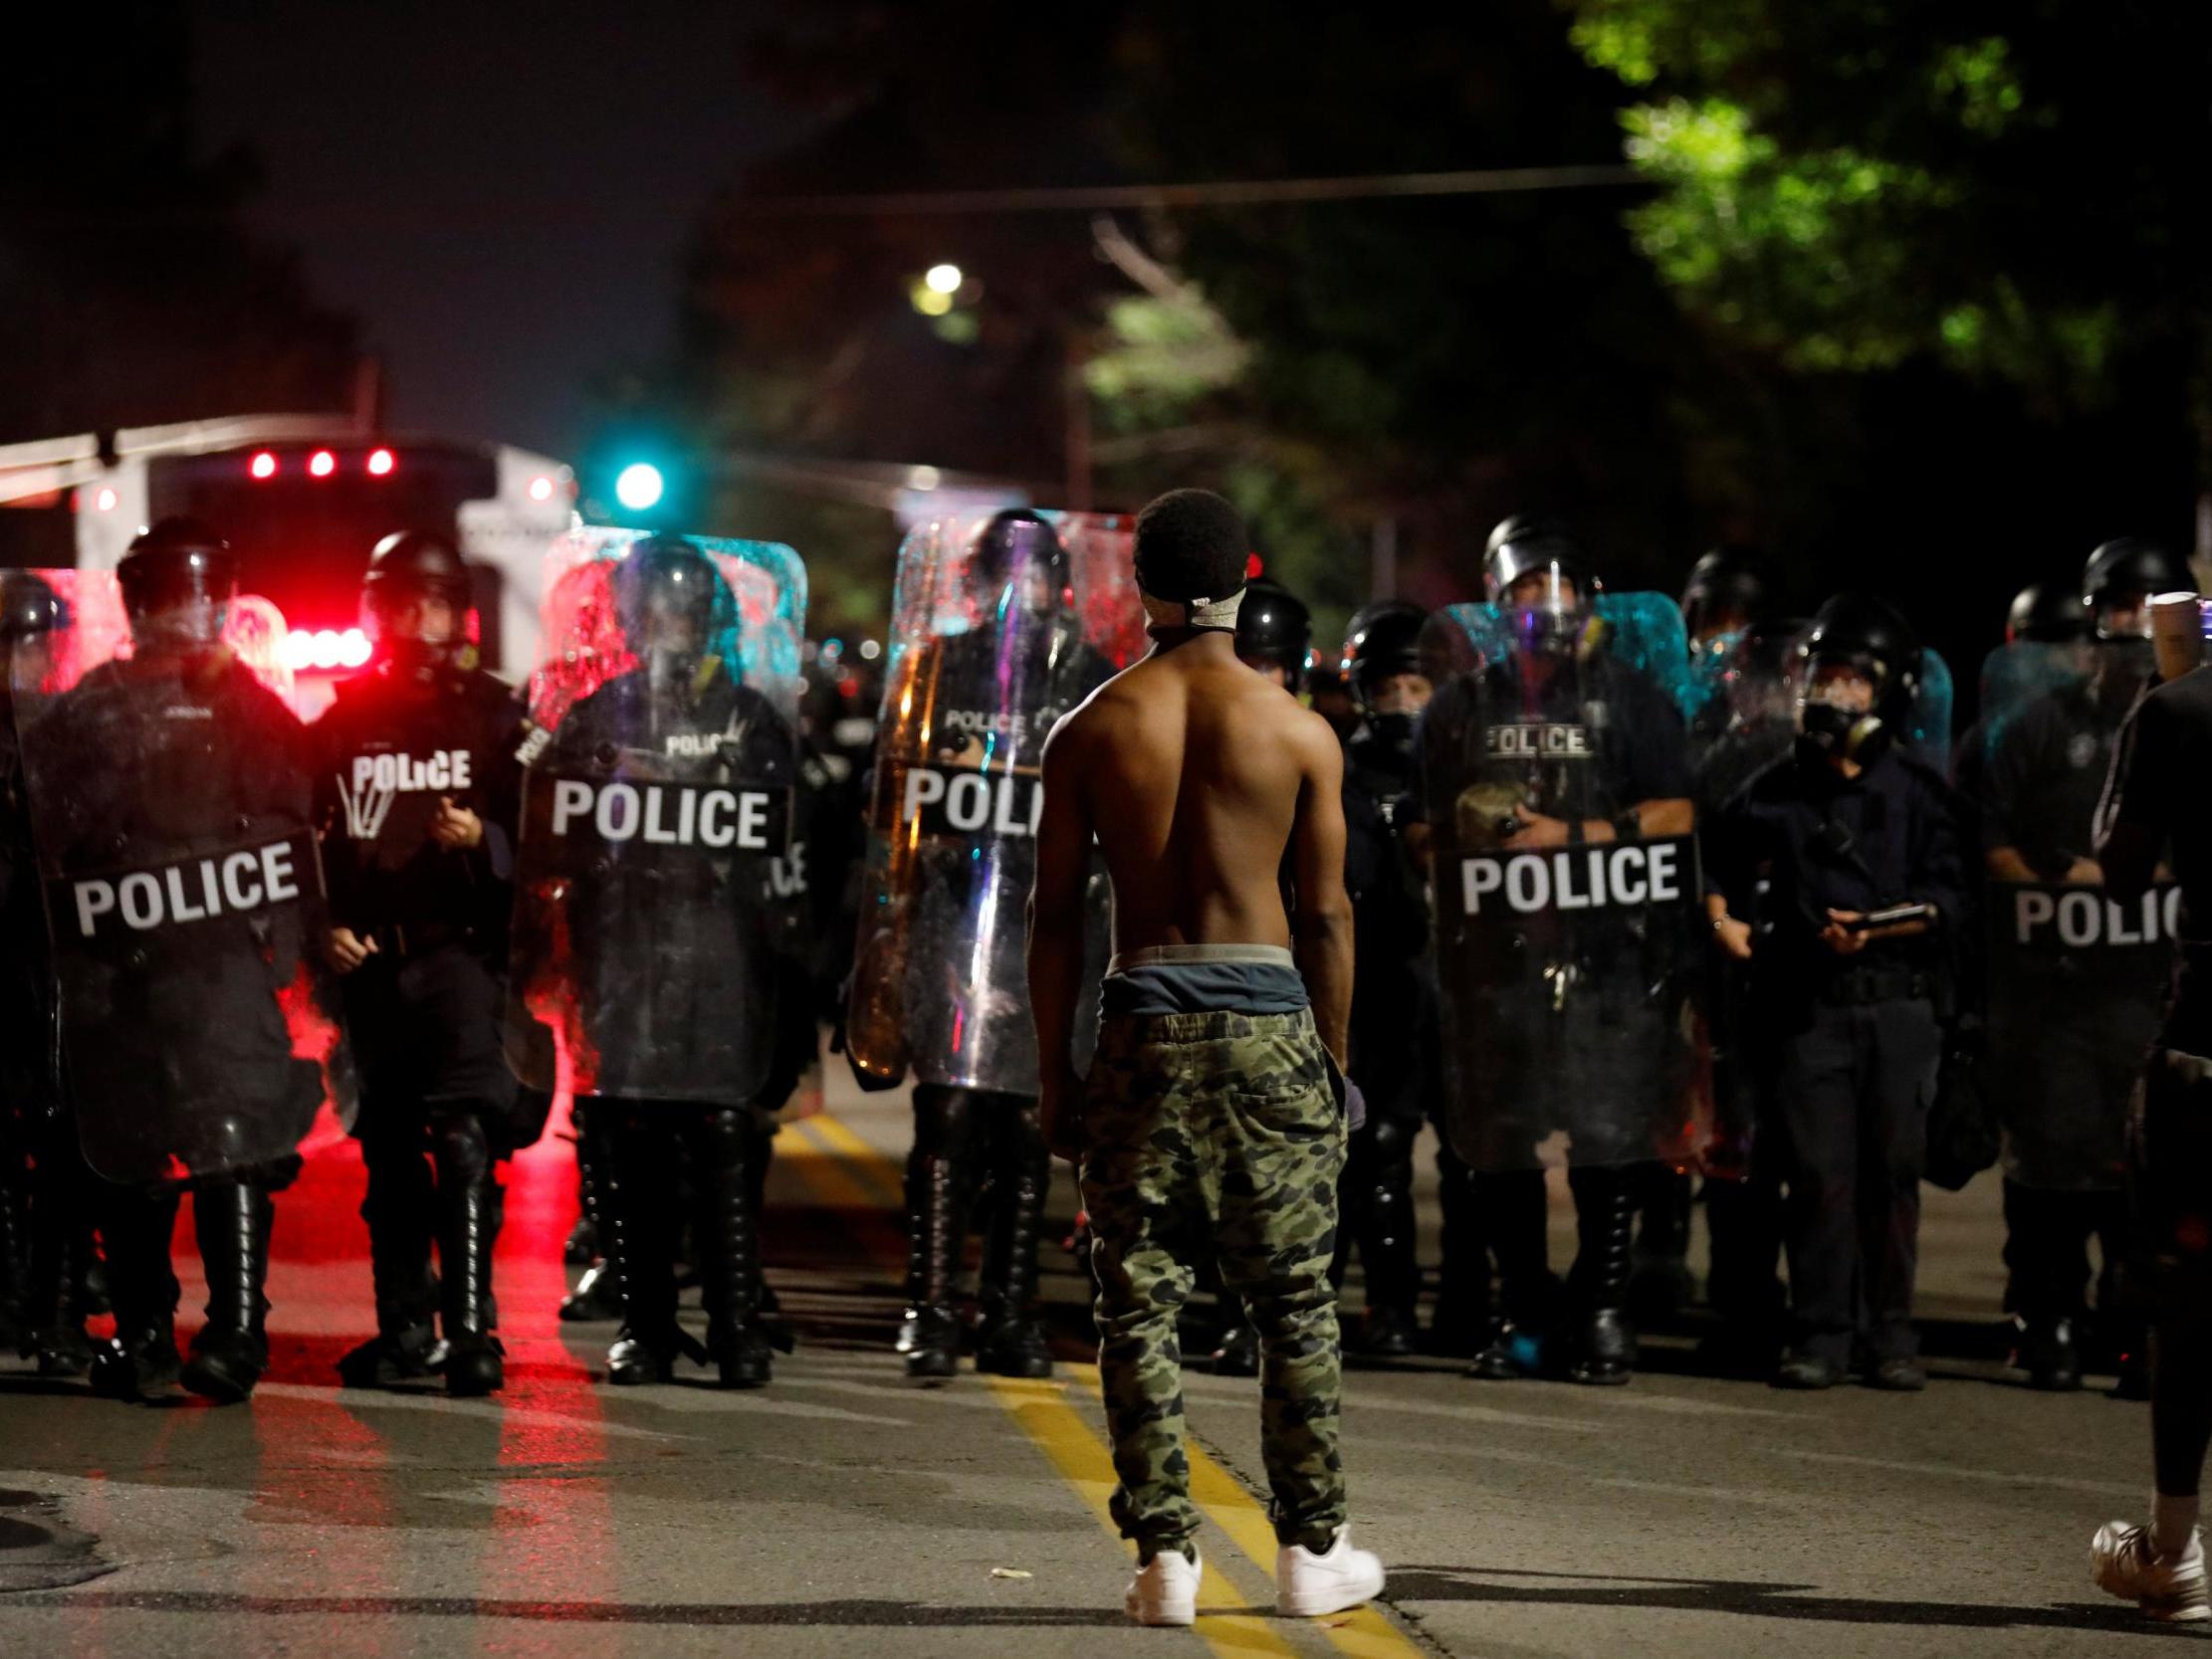 A protester faces off with law enforcement officials during Friday’s protests in St Louis